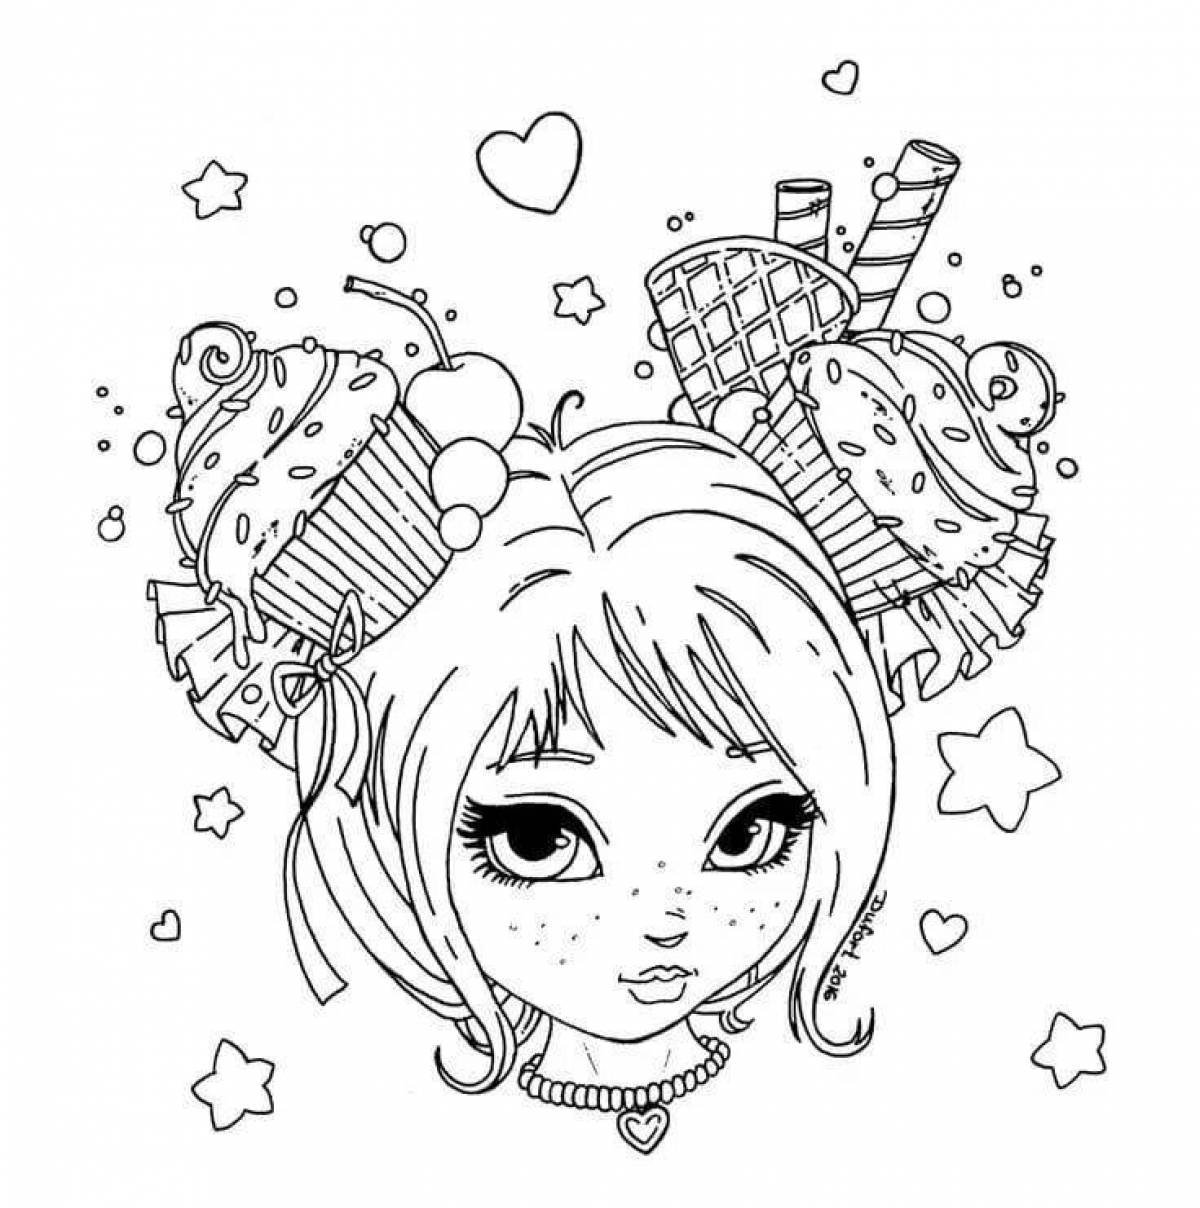 Amazing coloring pages for girls 9 years old